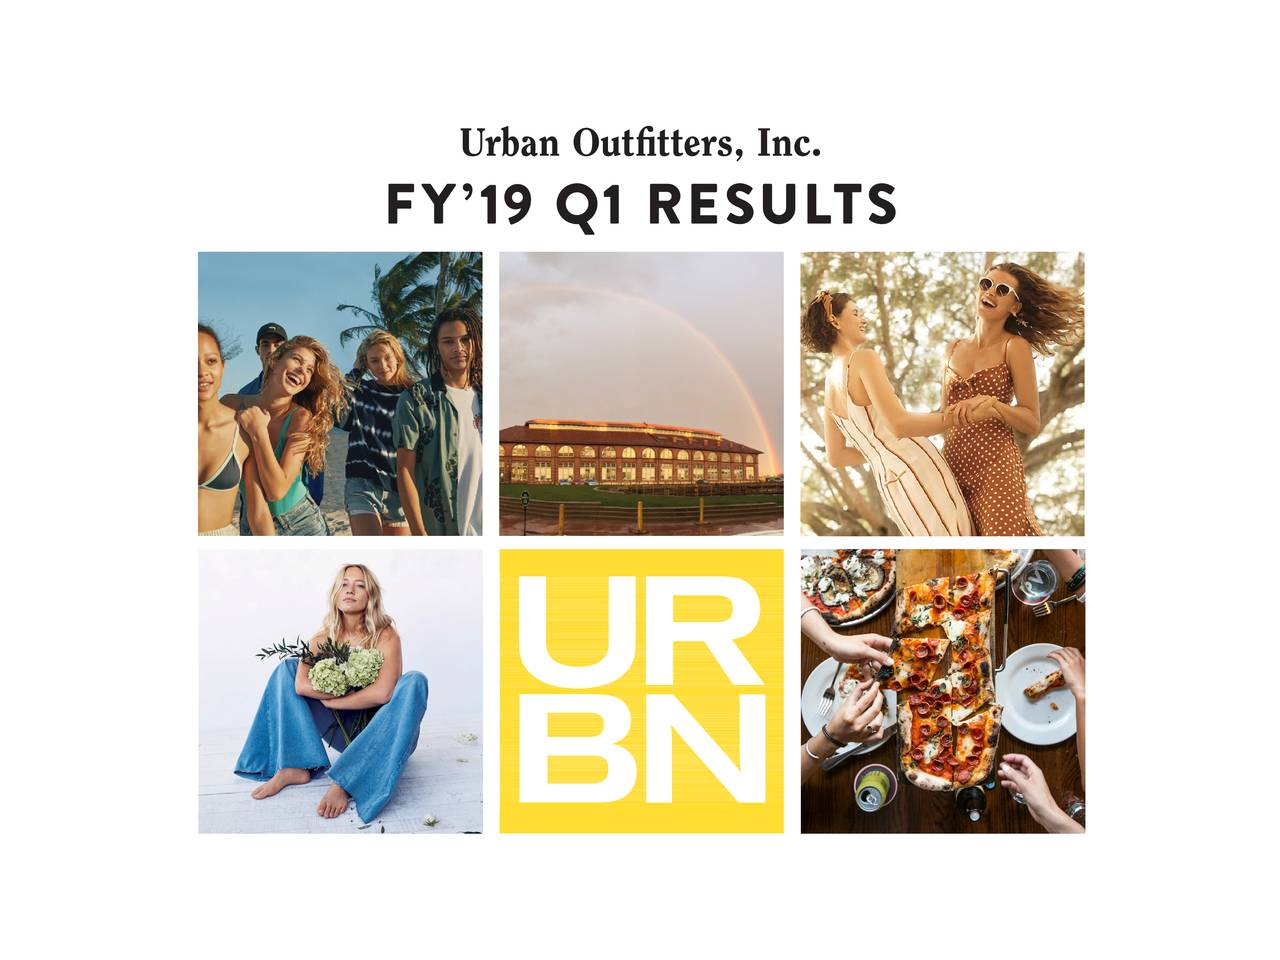 FY’19 Q1 RESULTS